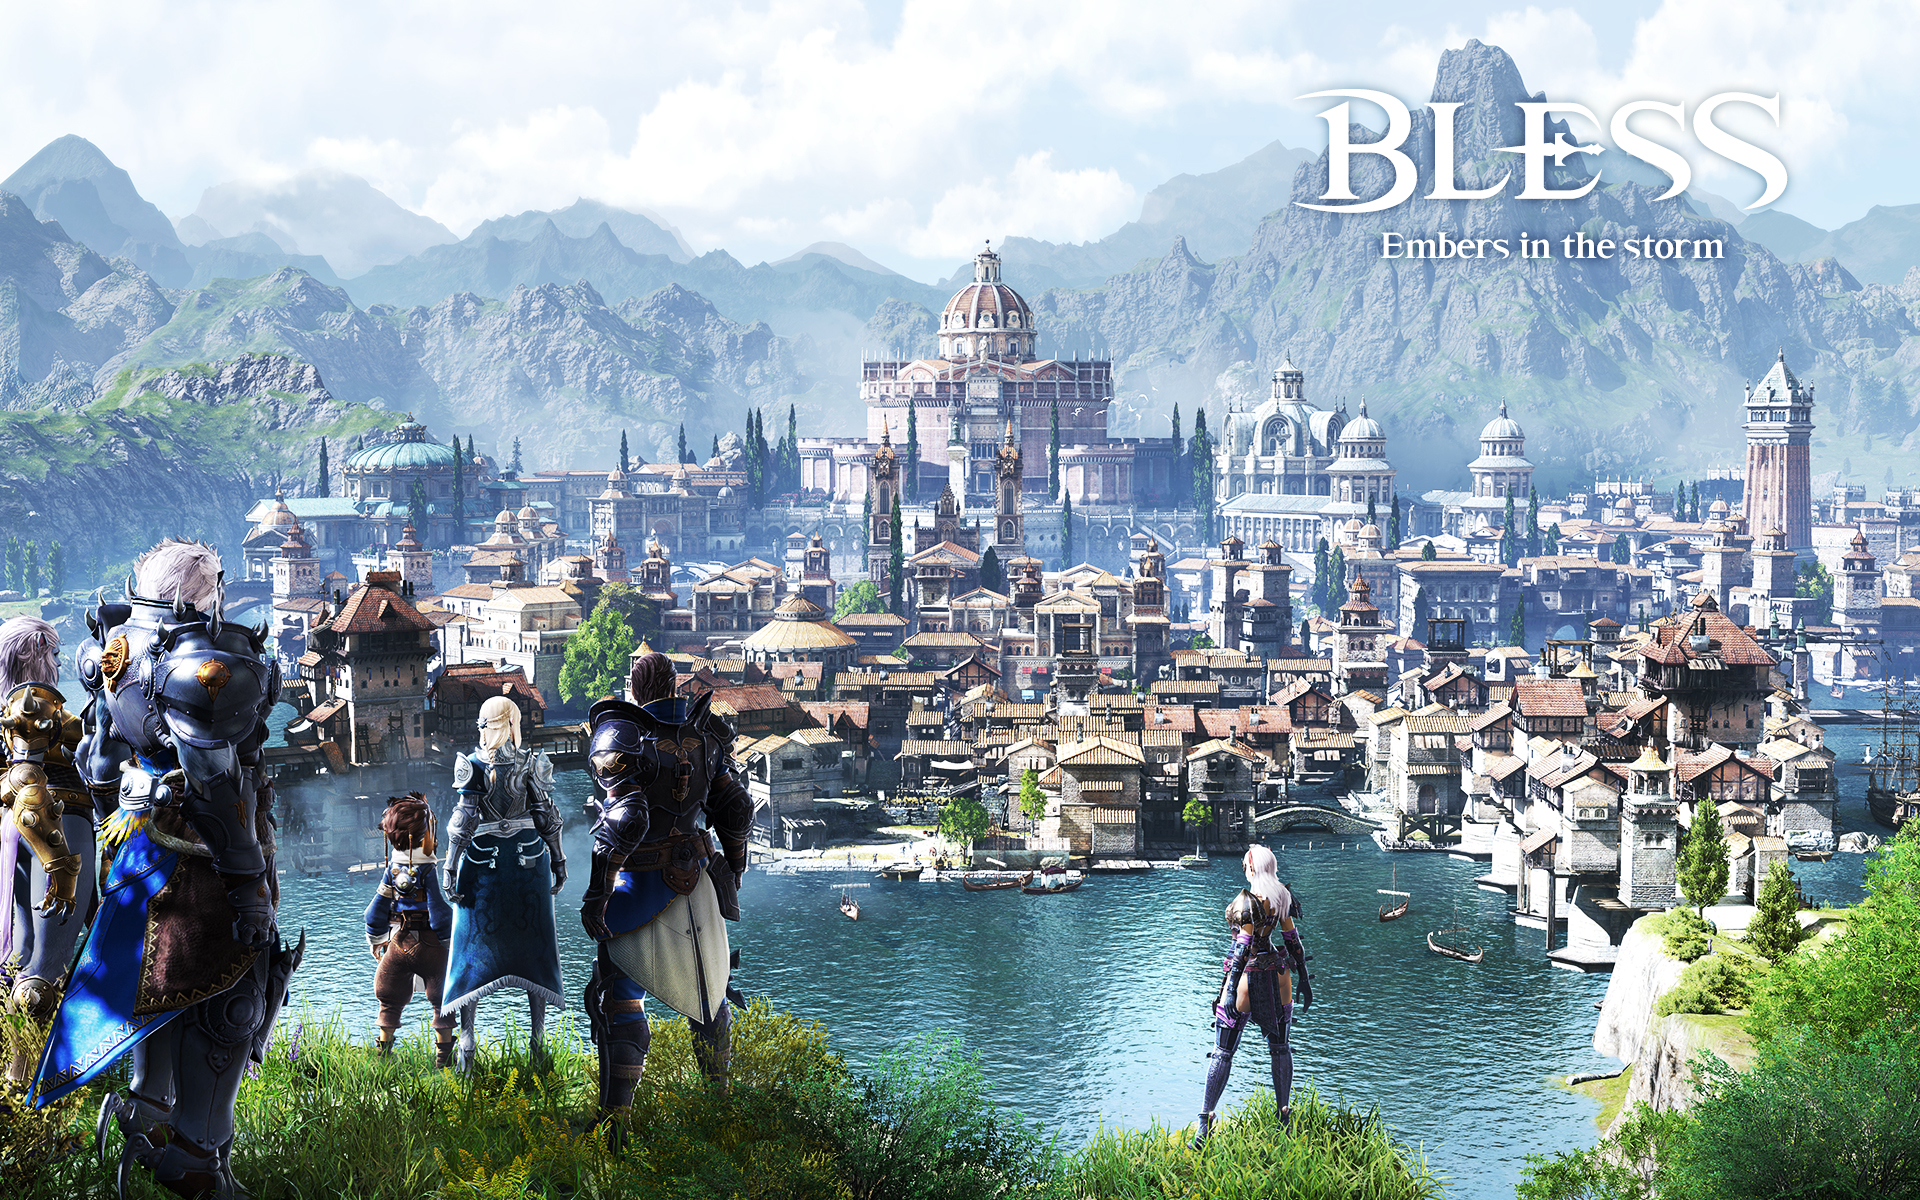 Video Game Bless Online HD Wallpaper | Background Image